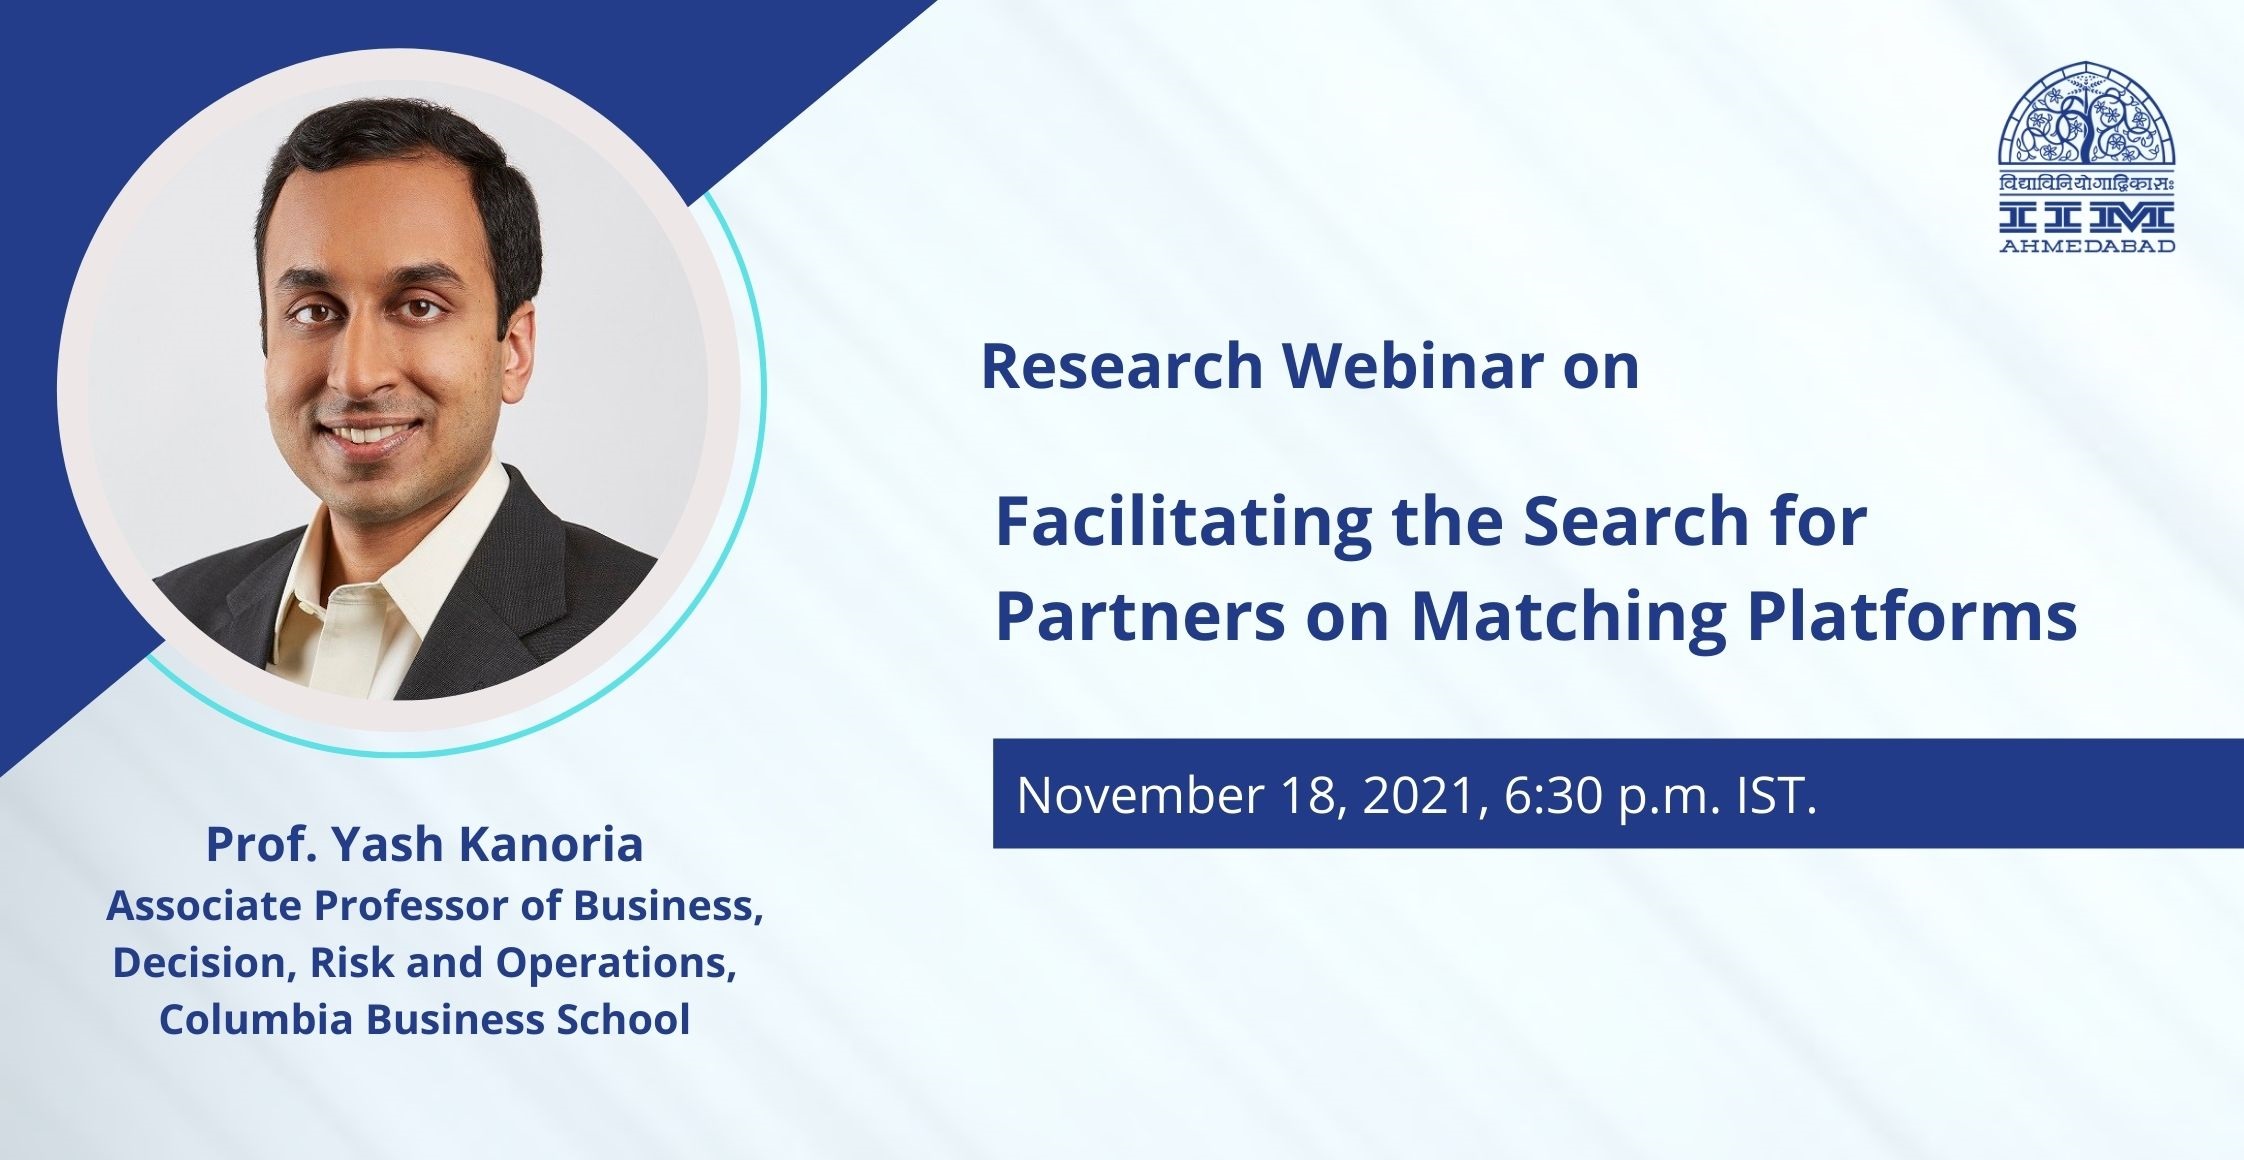 Research Webinar on Facilitating the Search for Partners on Matching Platform 